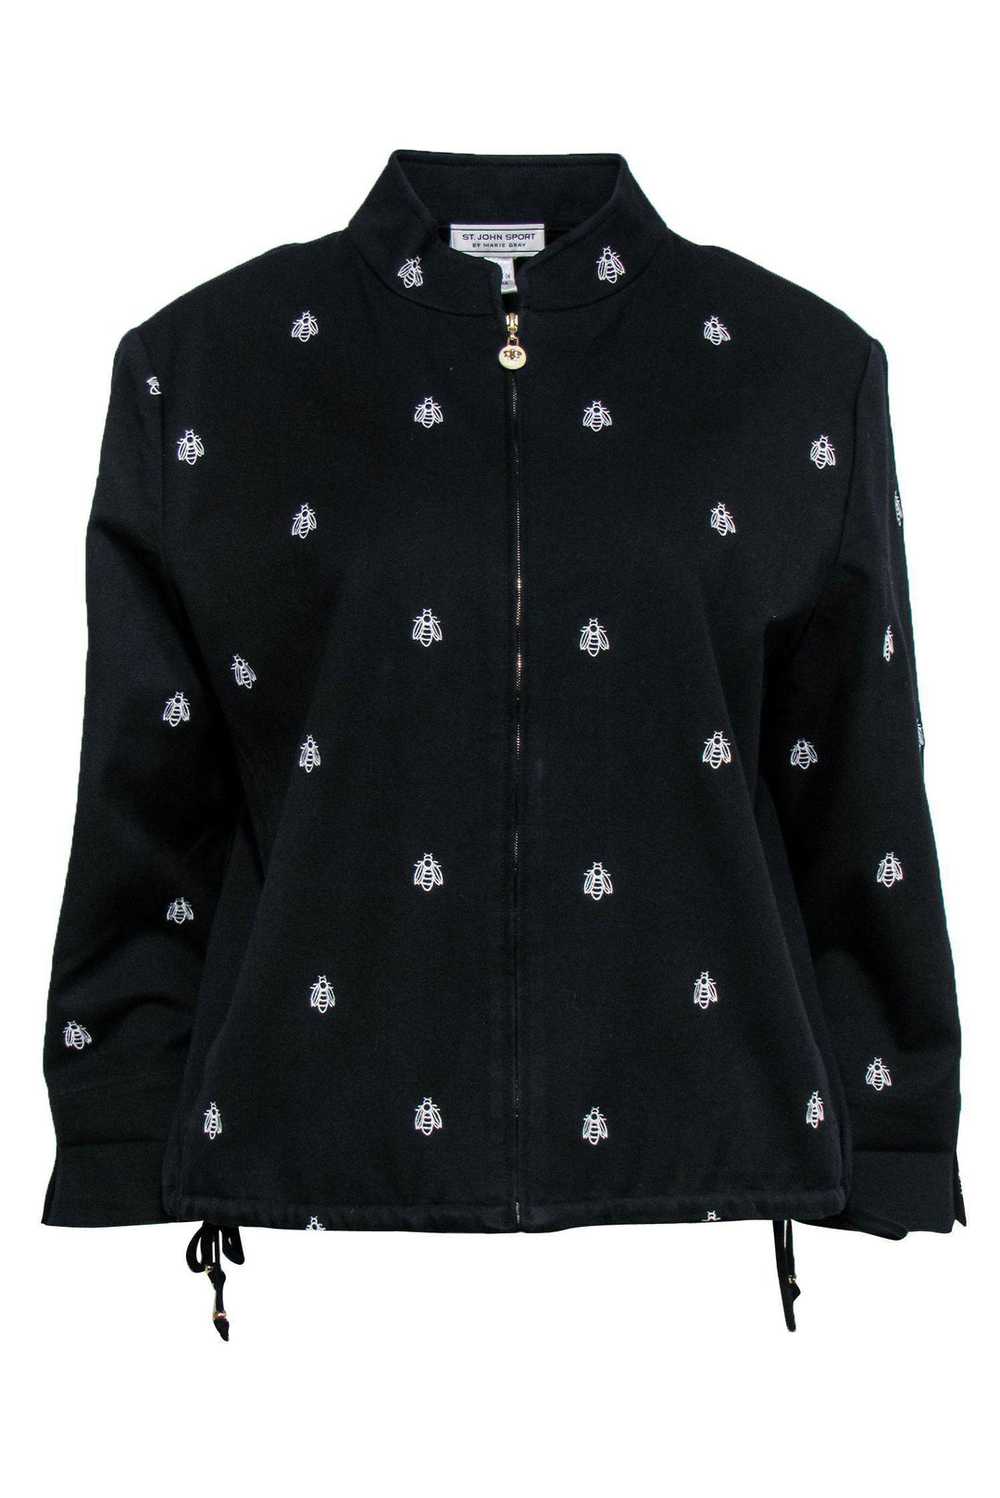 St. John Sport - Black Bee Embroidered Zip-Up Jac… - image 1